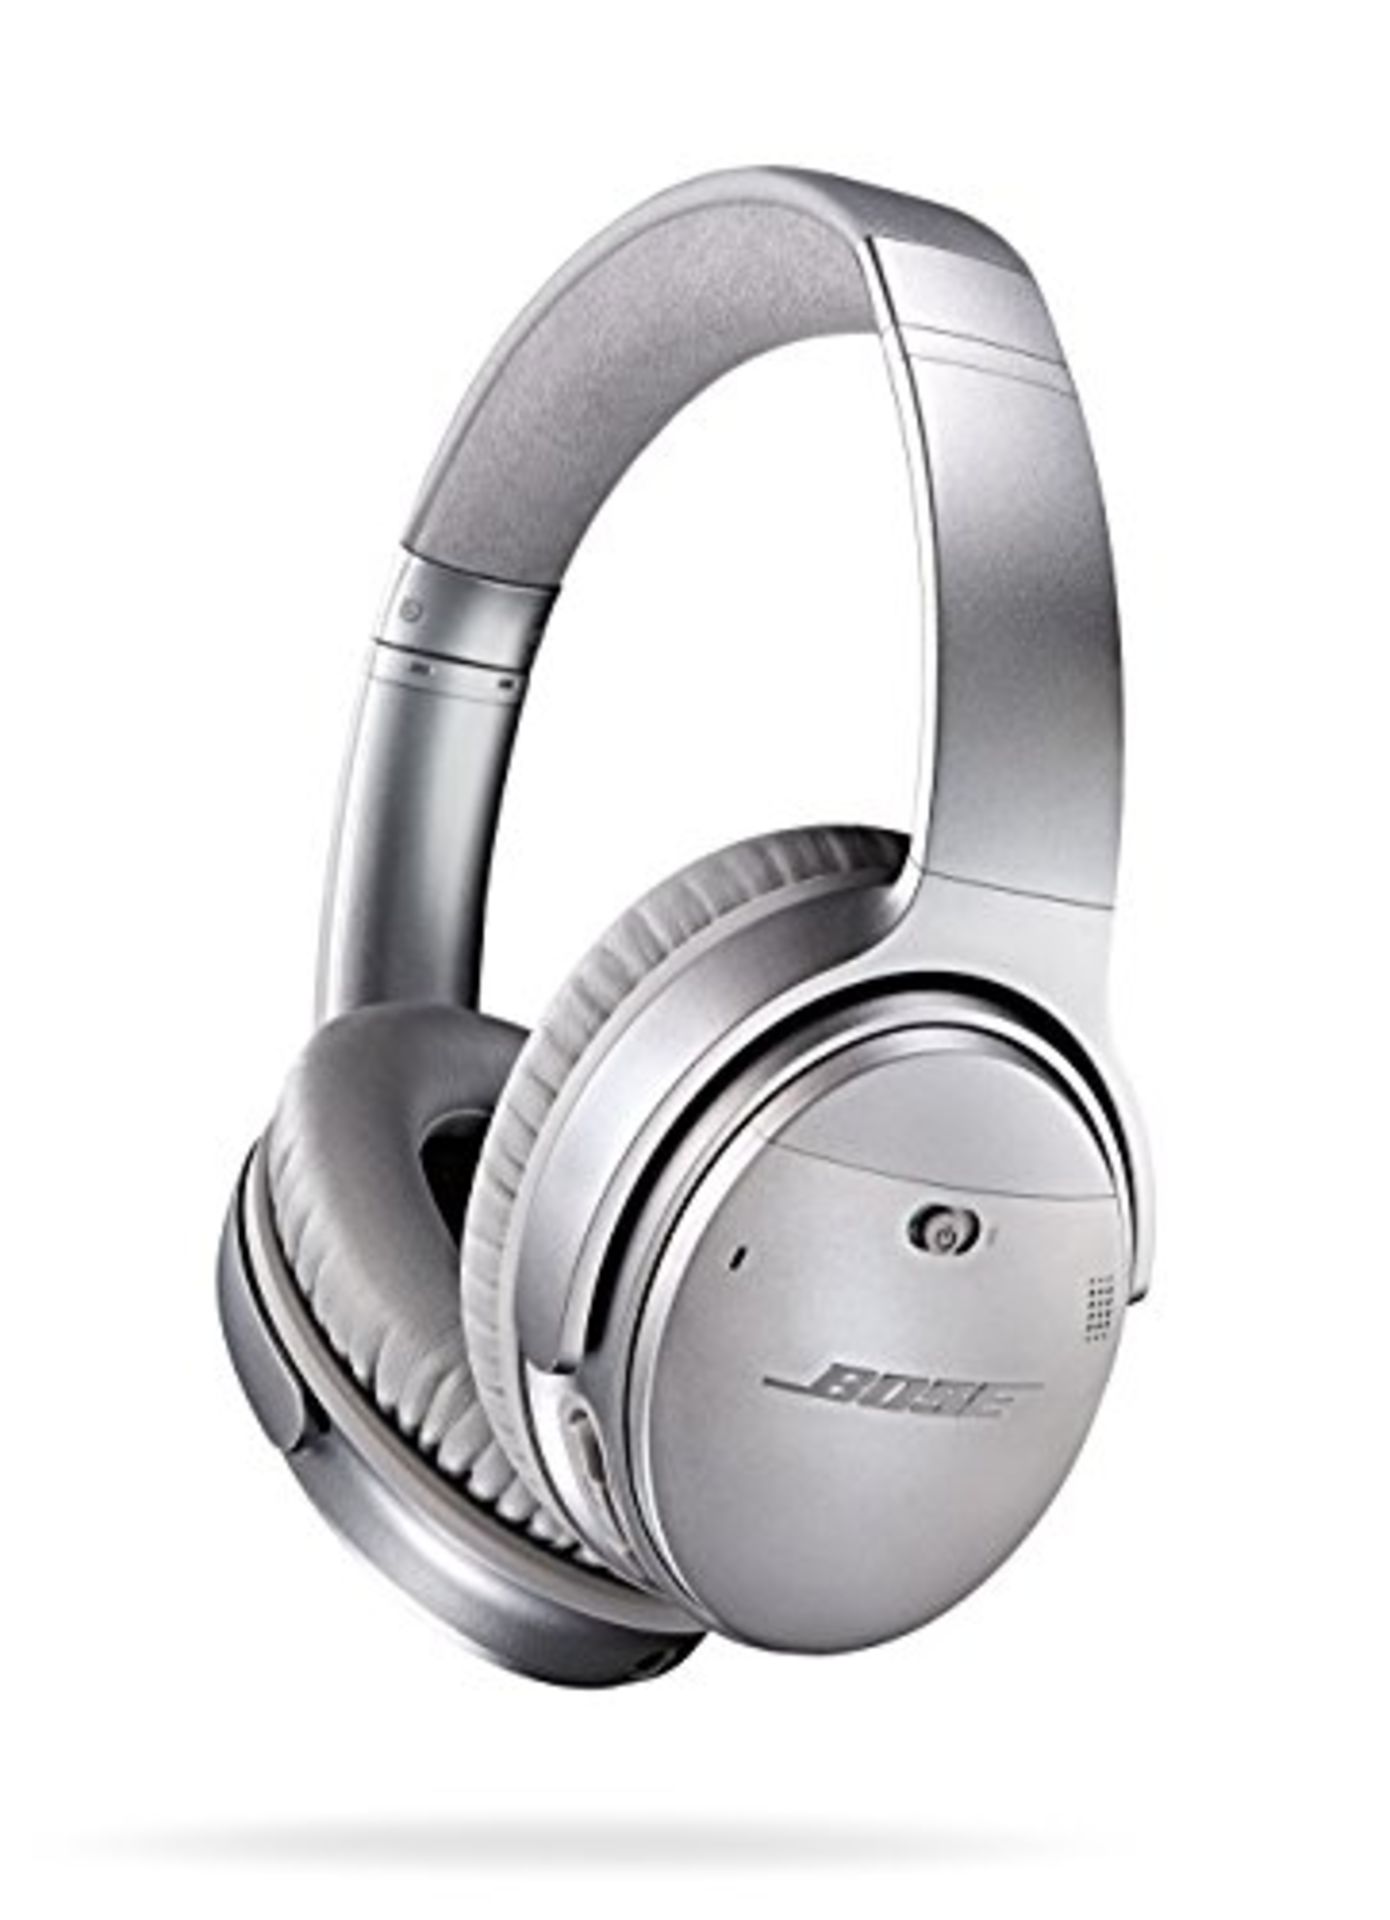 RRP £220.00 Bose QuietComfort 35 (Series I) Wireless Headphones, Noise Cancelling - Silver